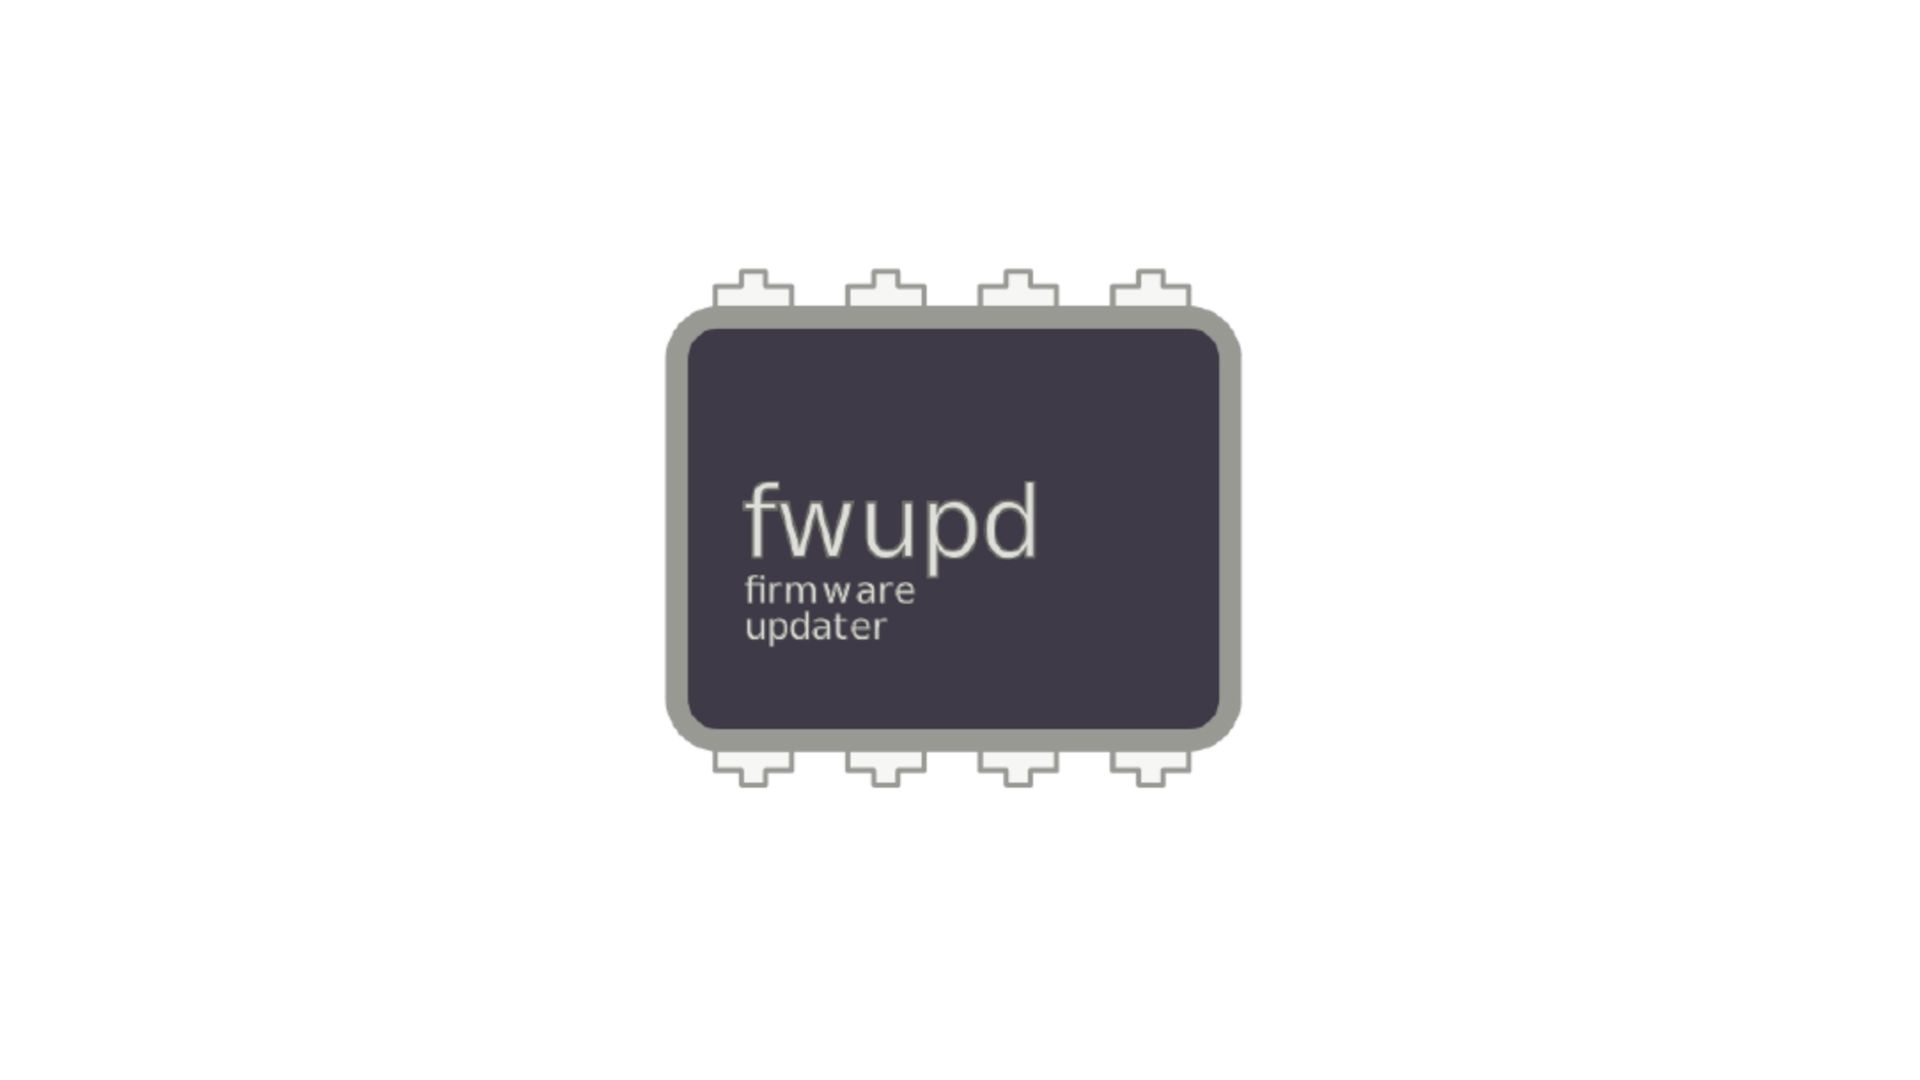 Upcoming Fwupd Linux Firmware Updates to Utilize Zstd Compression